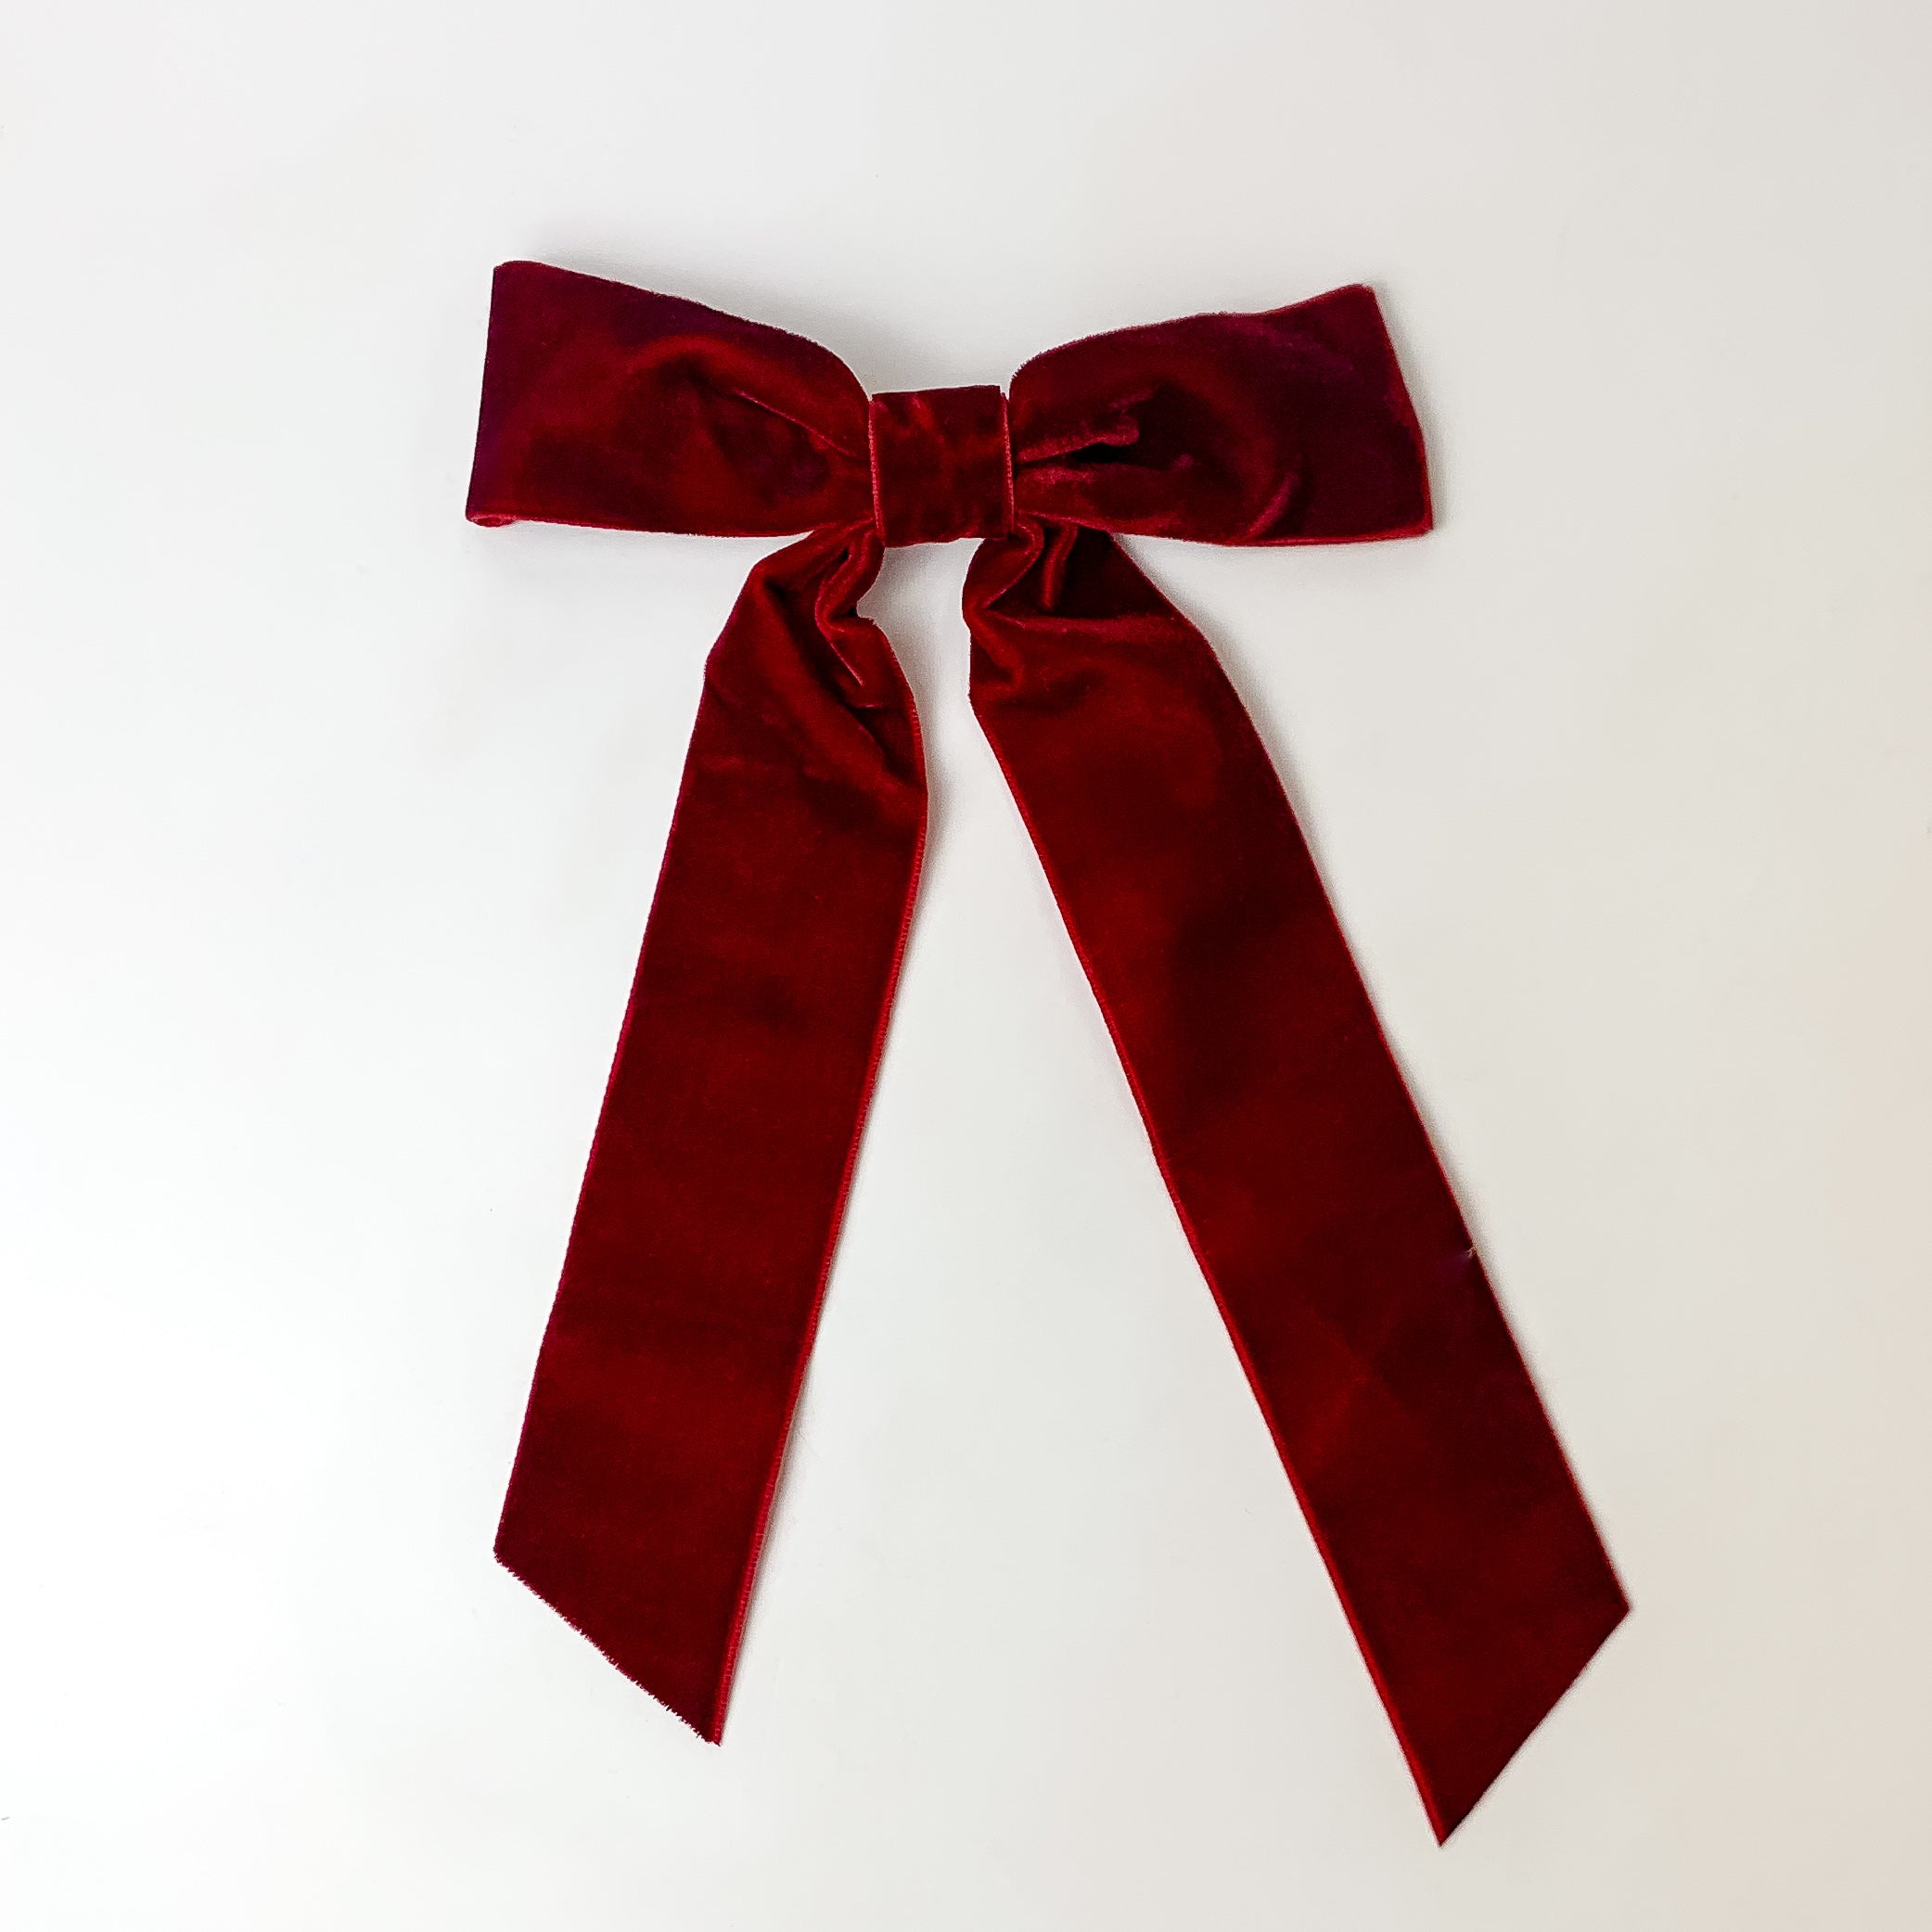 This beautiful crimson glory red bow is taken with a white background.